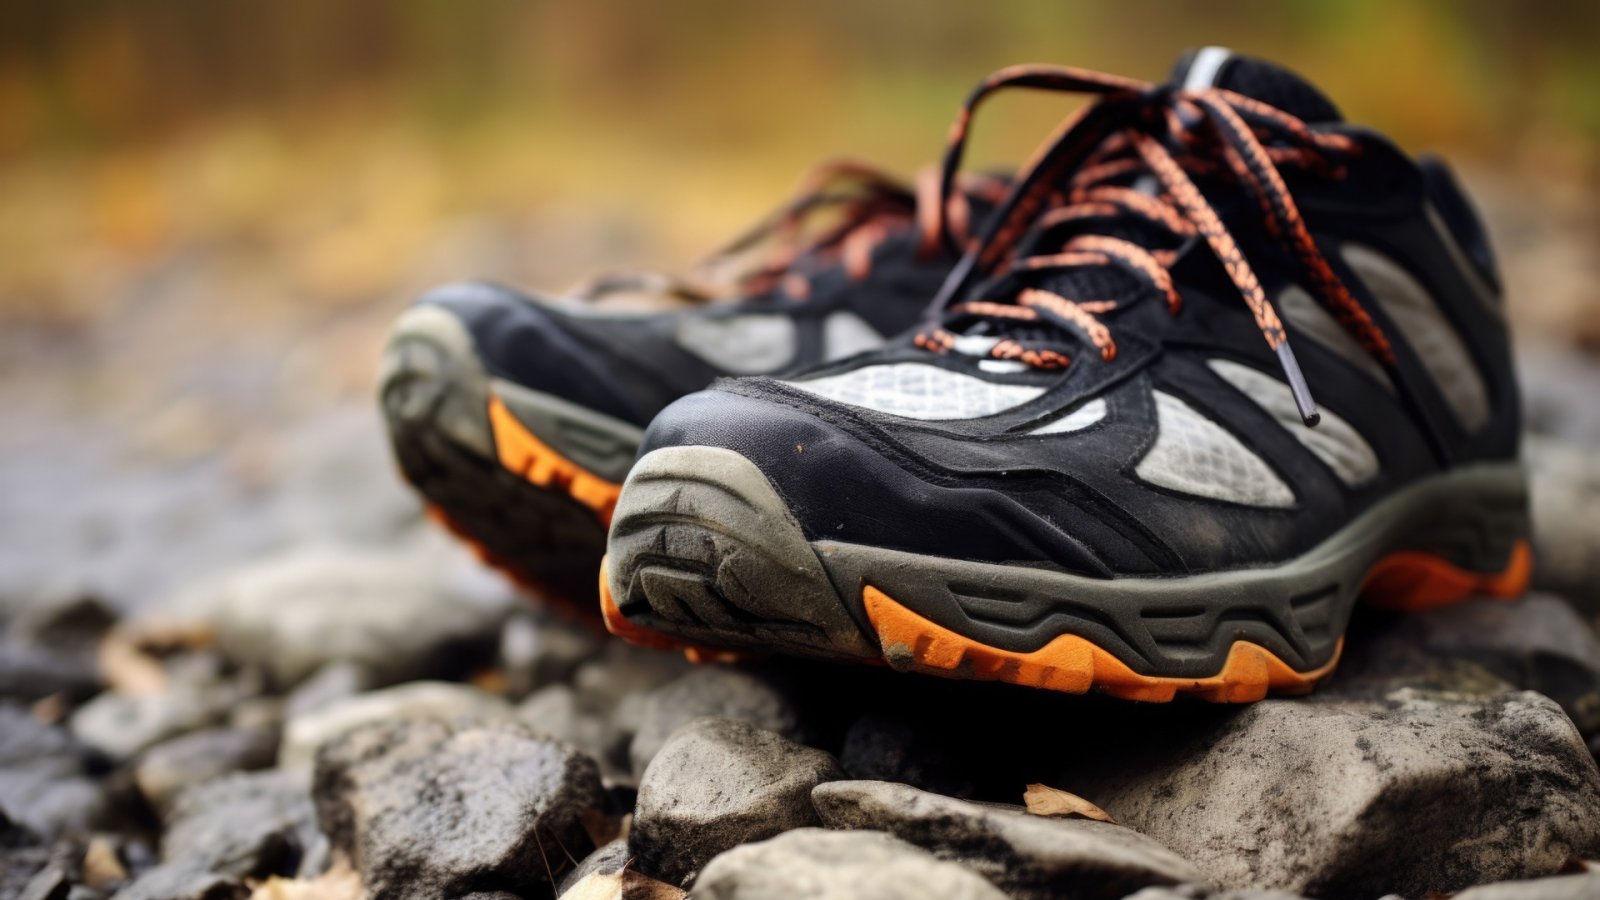 Top 5 Salomon sneakers ready for your next expedition